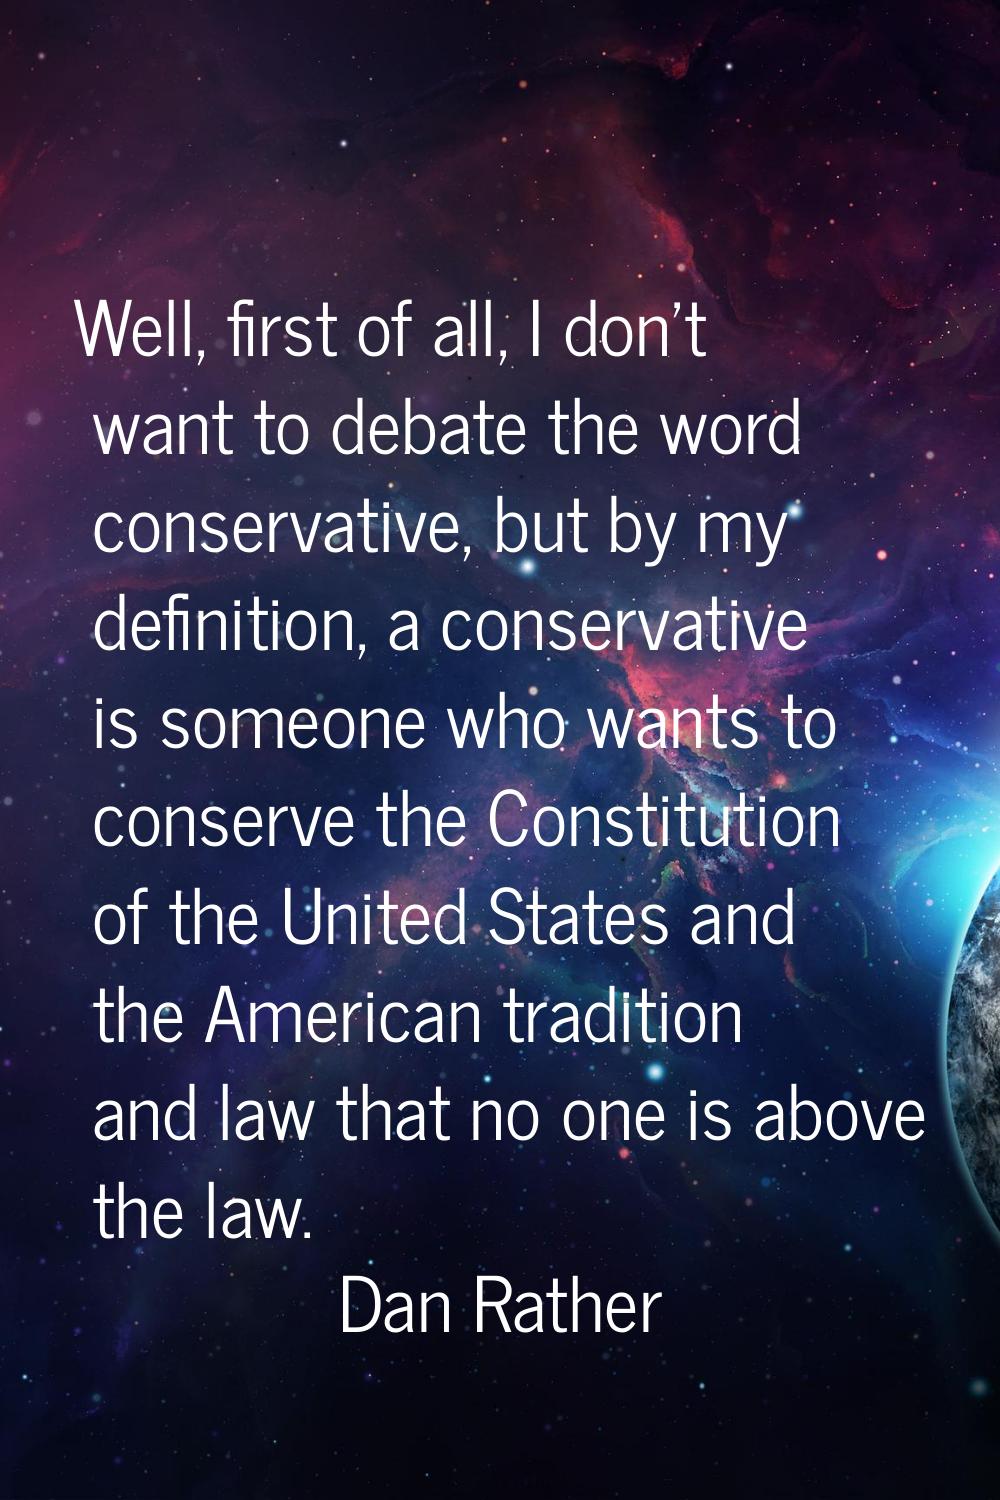 Well, first of all, I don't want to debate the word conservative, but by my definition, a conservat